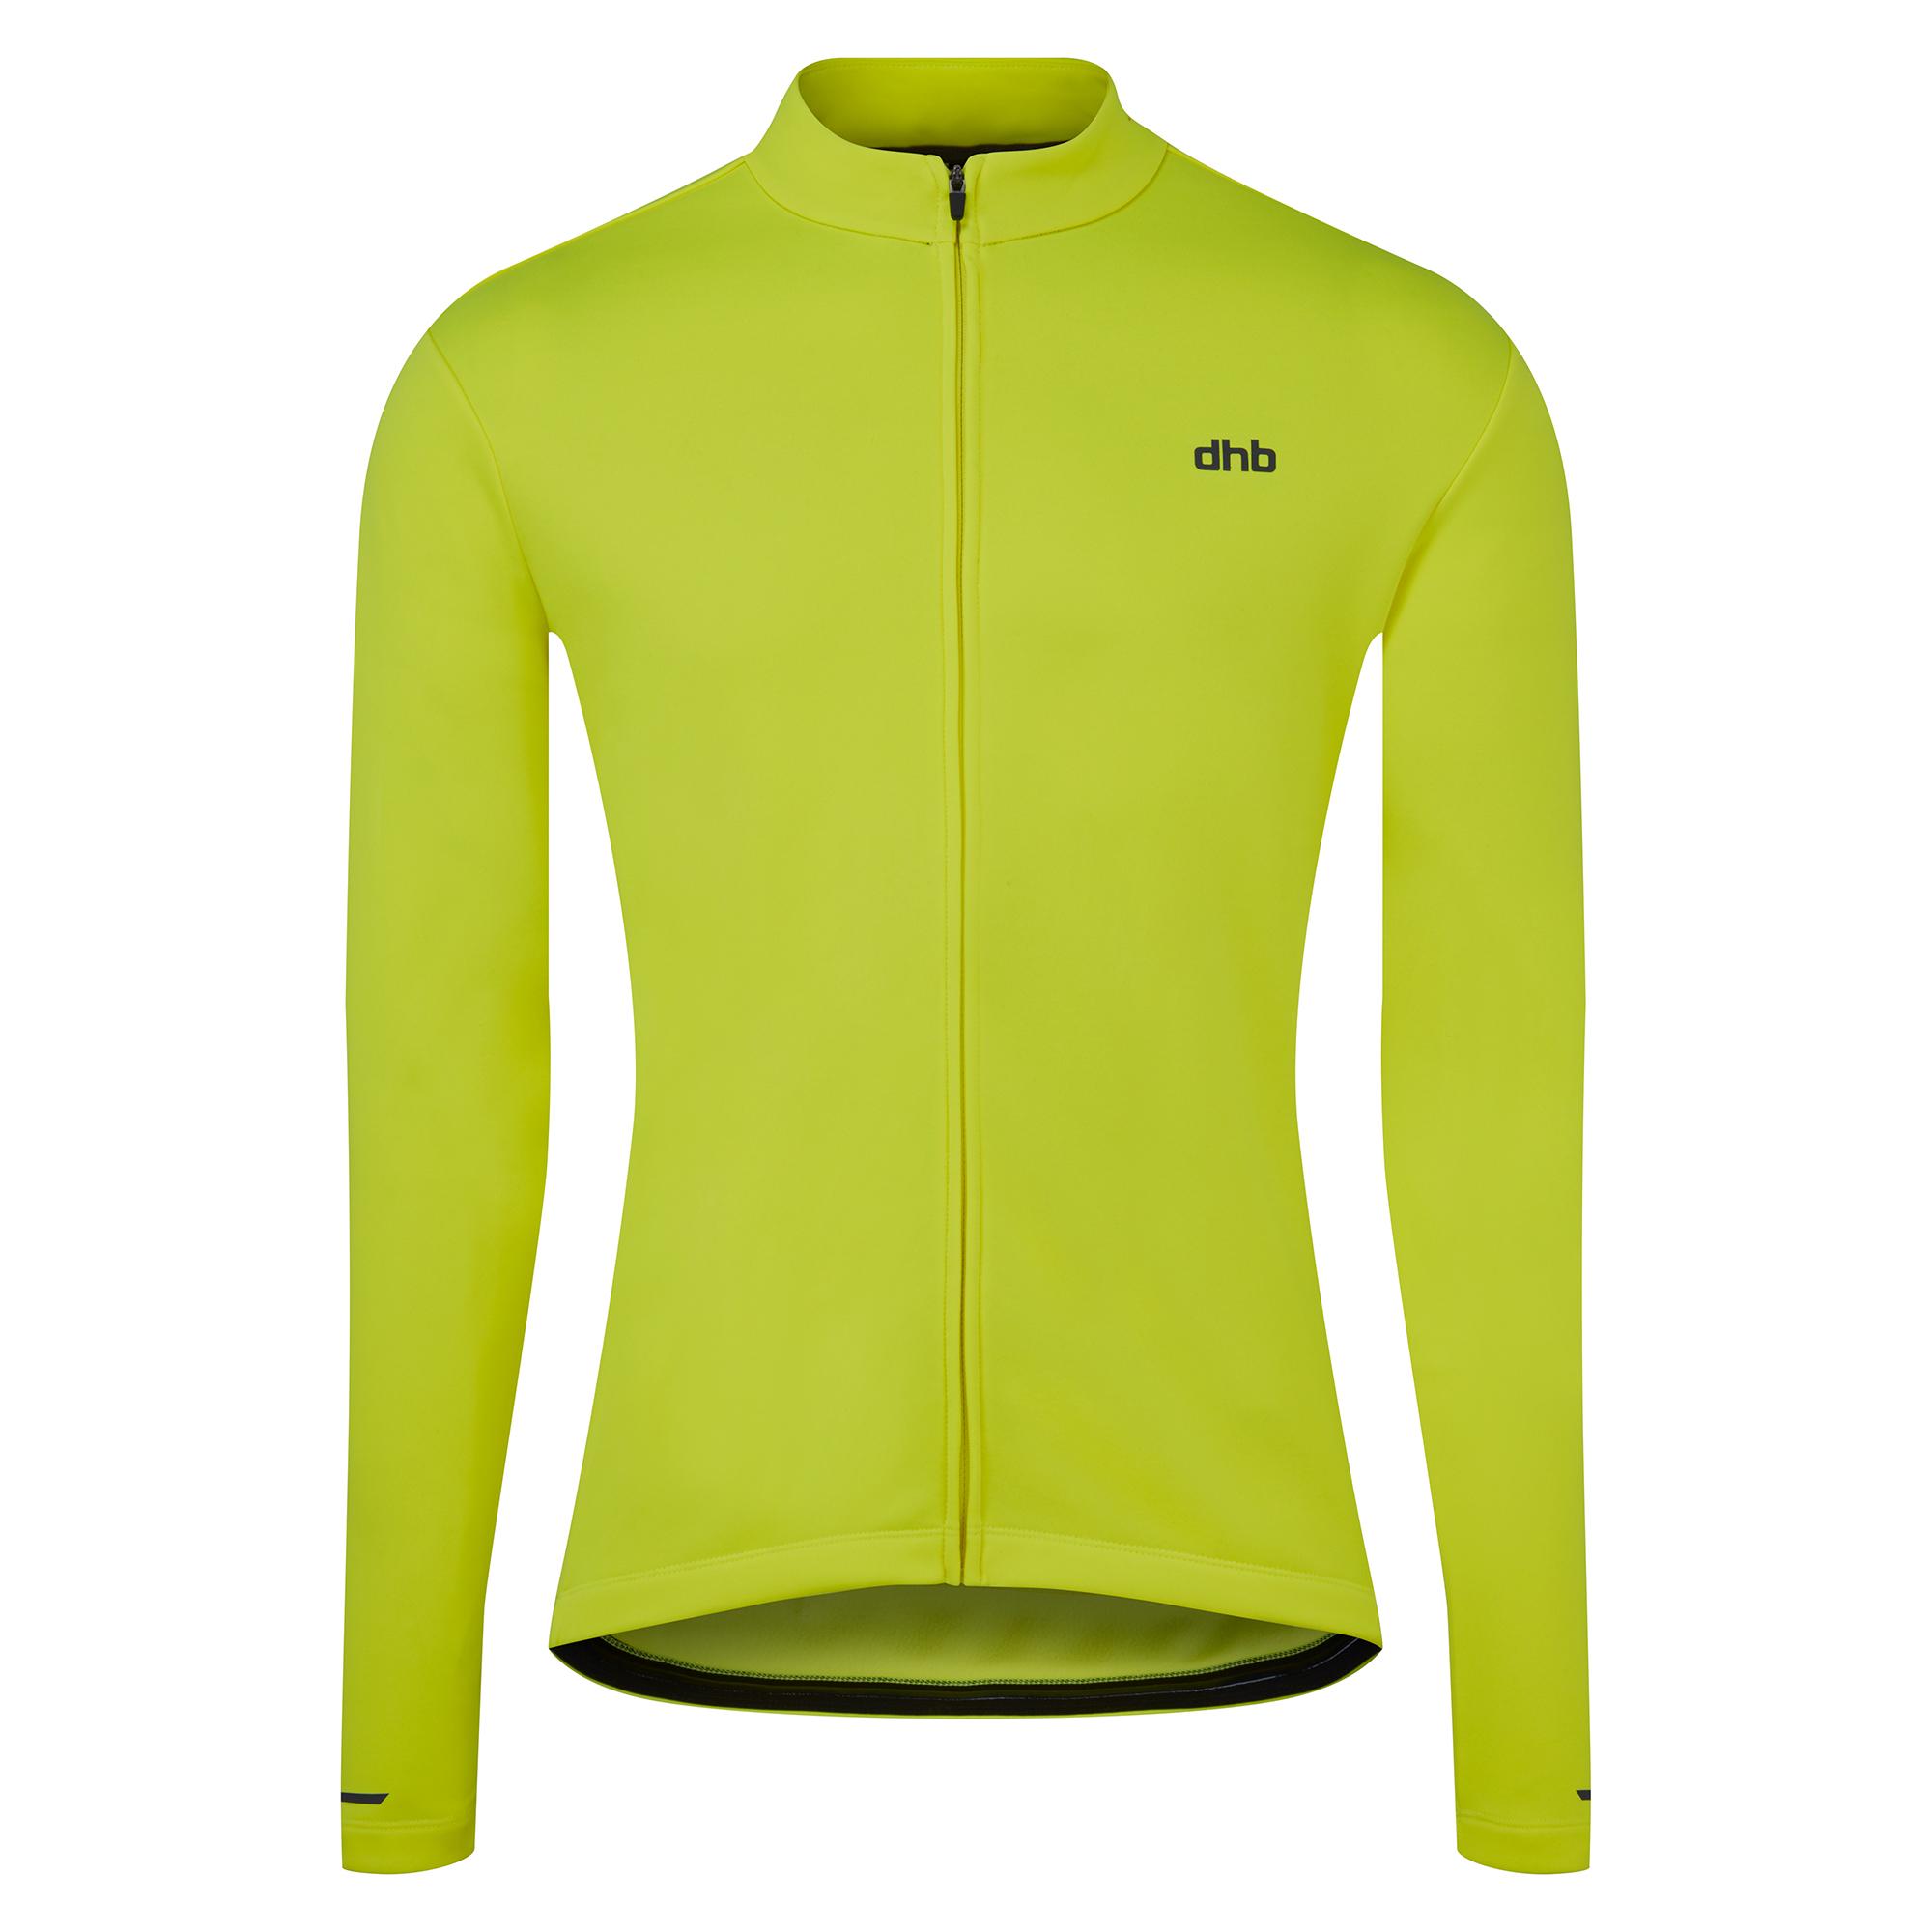 Dhb Mens Long Sleeve Thermal Cycling Jersey - Safety Yellow